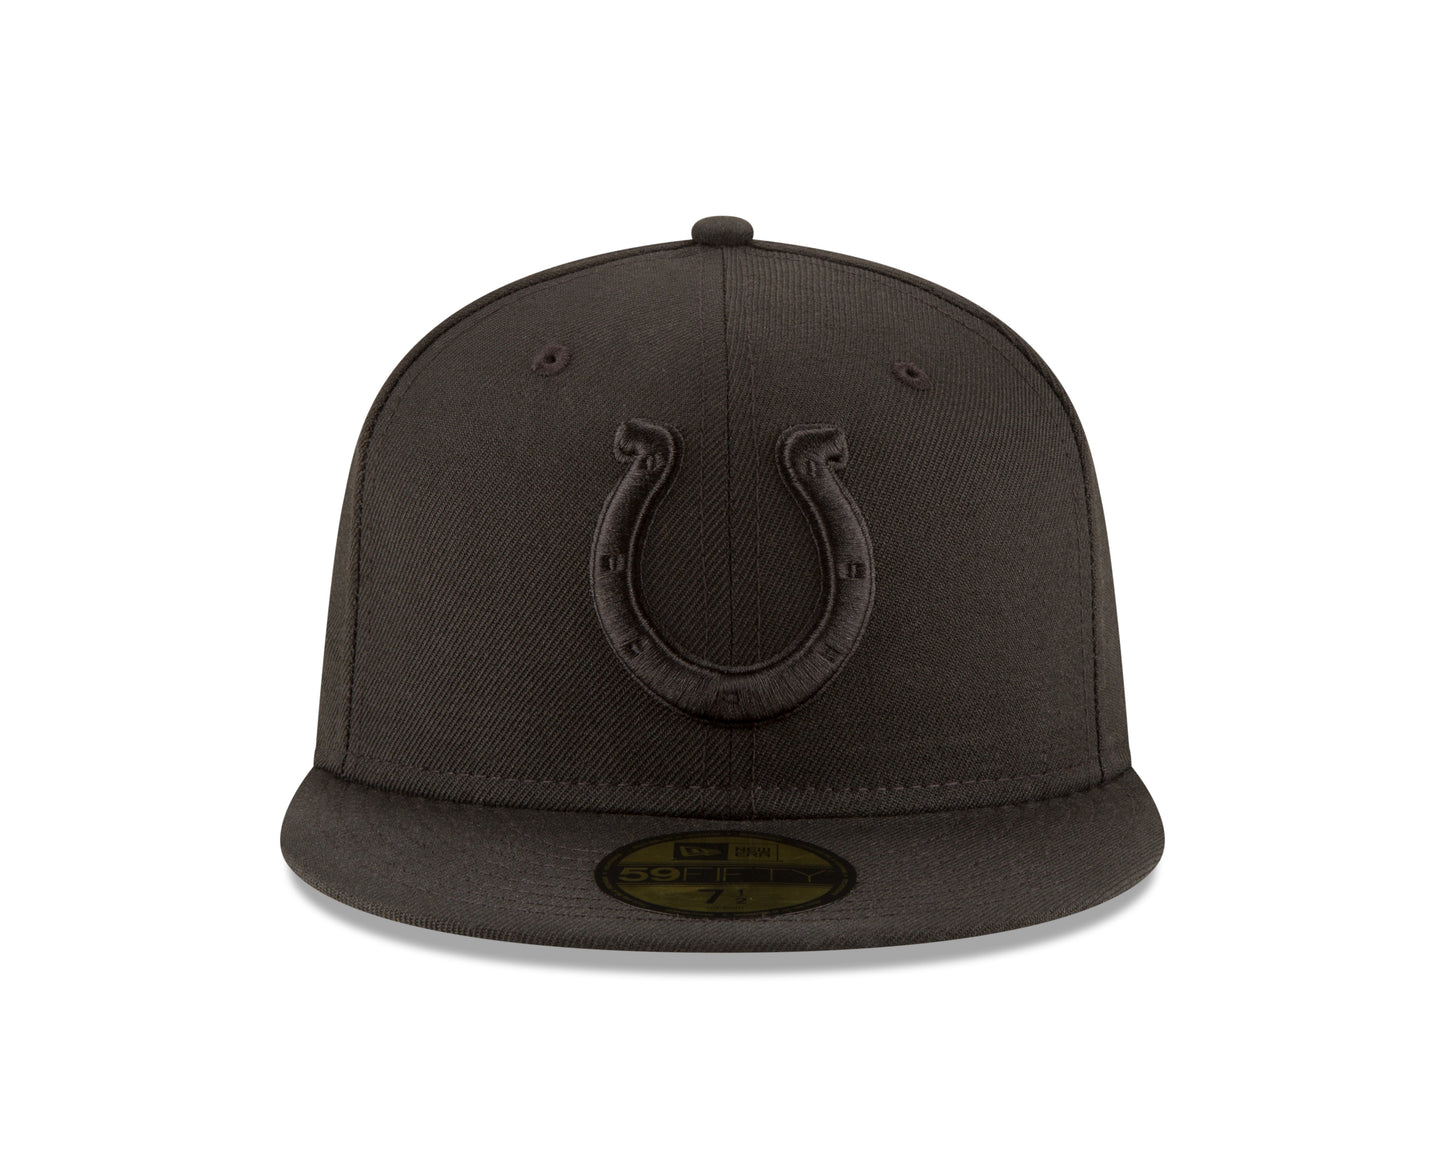 Indianapolis Colts New Era Black on Black 59FIFTY Fitted Hat - Black